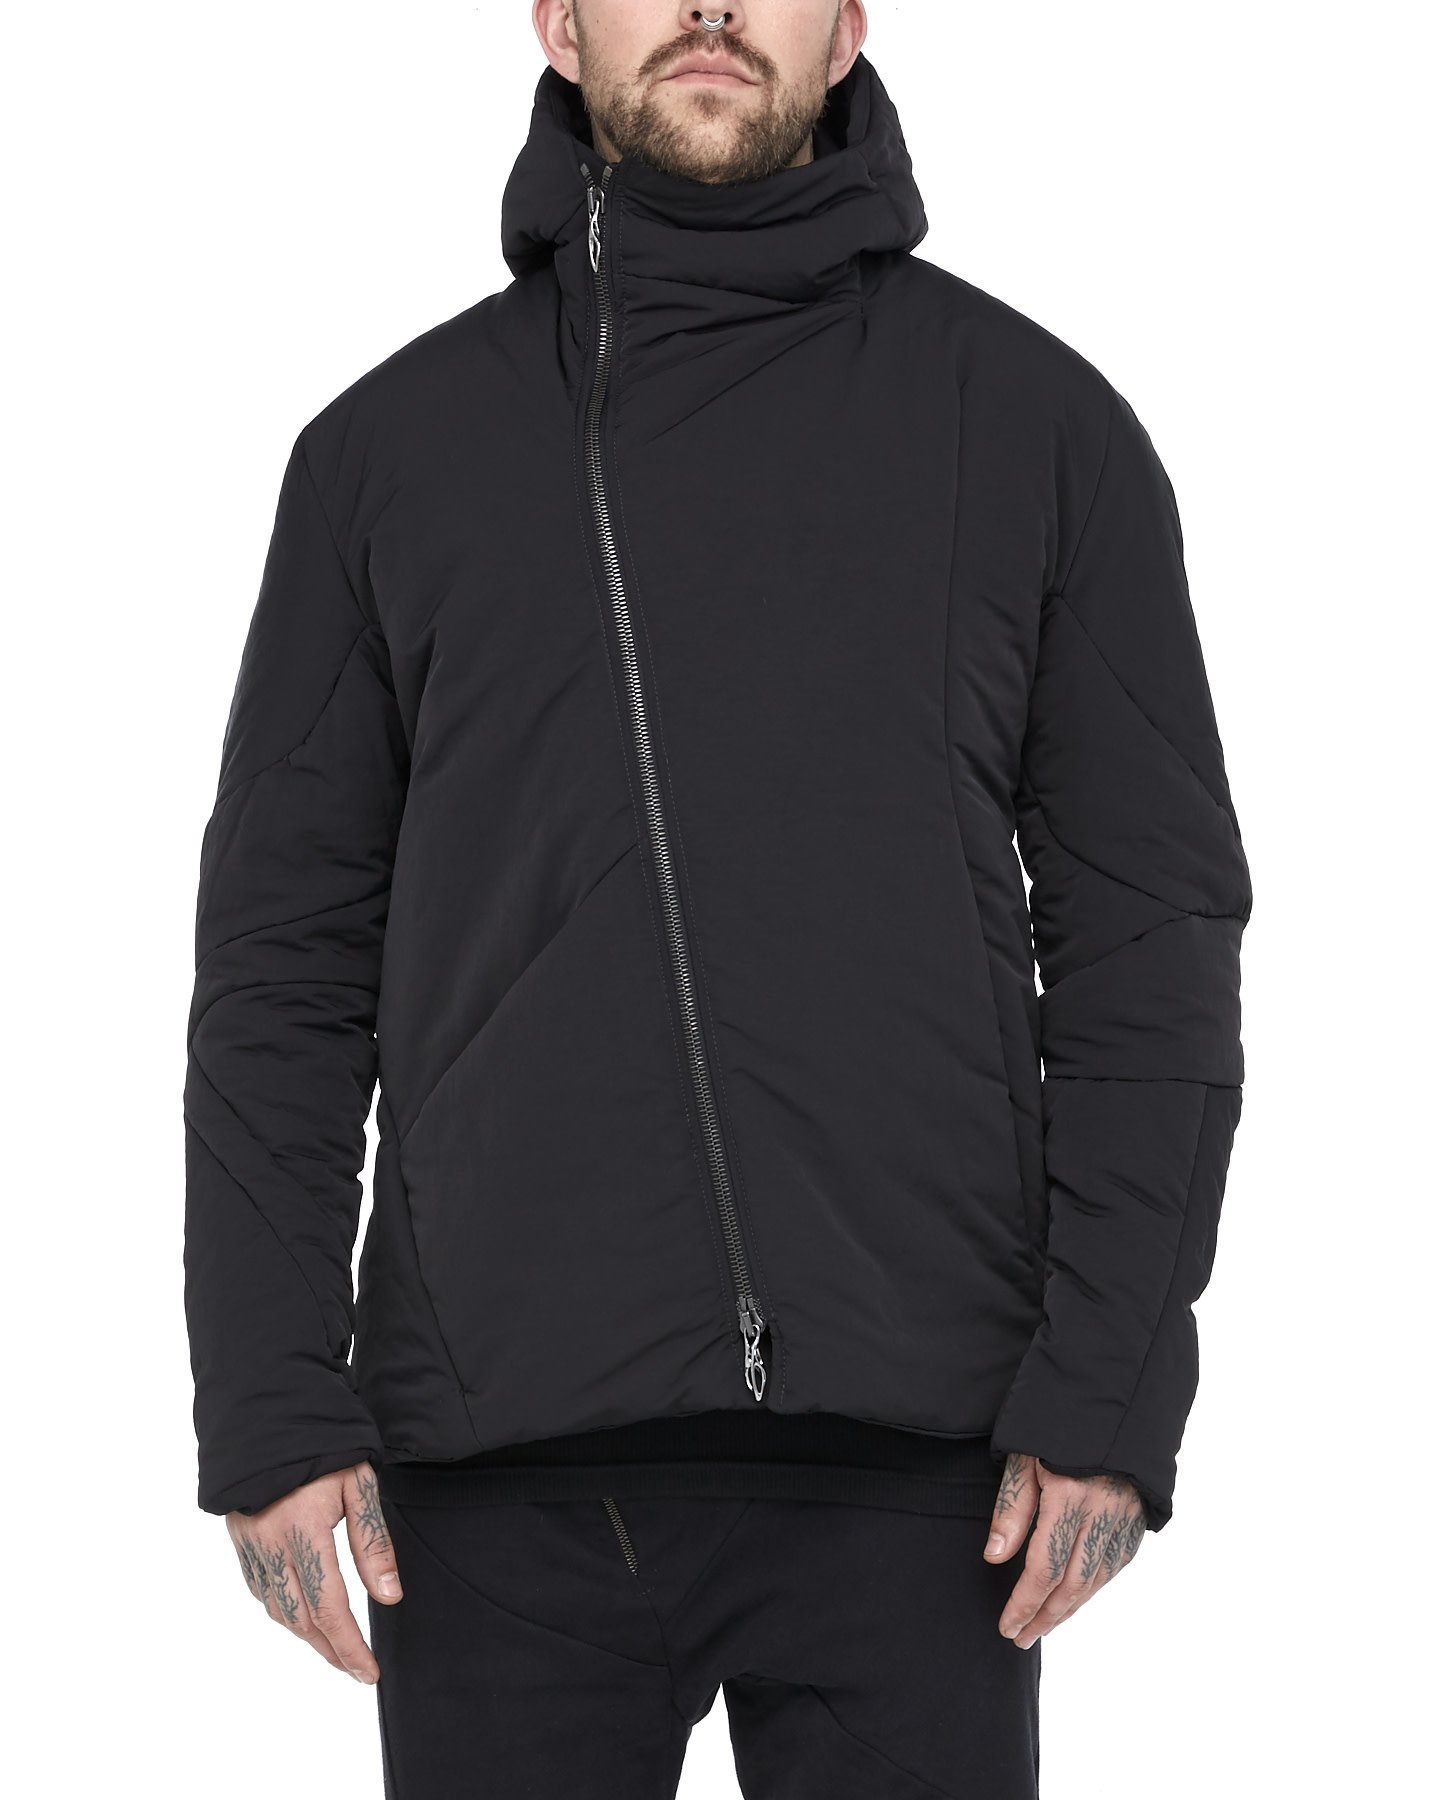 DISTORTION HOODED L JACKET - POLY TECH / GOOSE DOWN